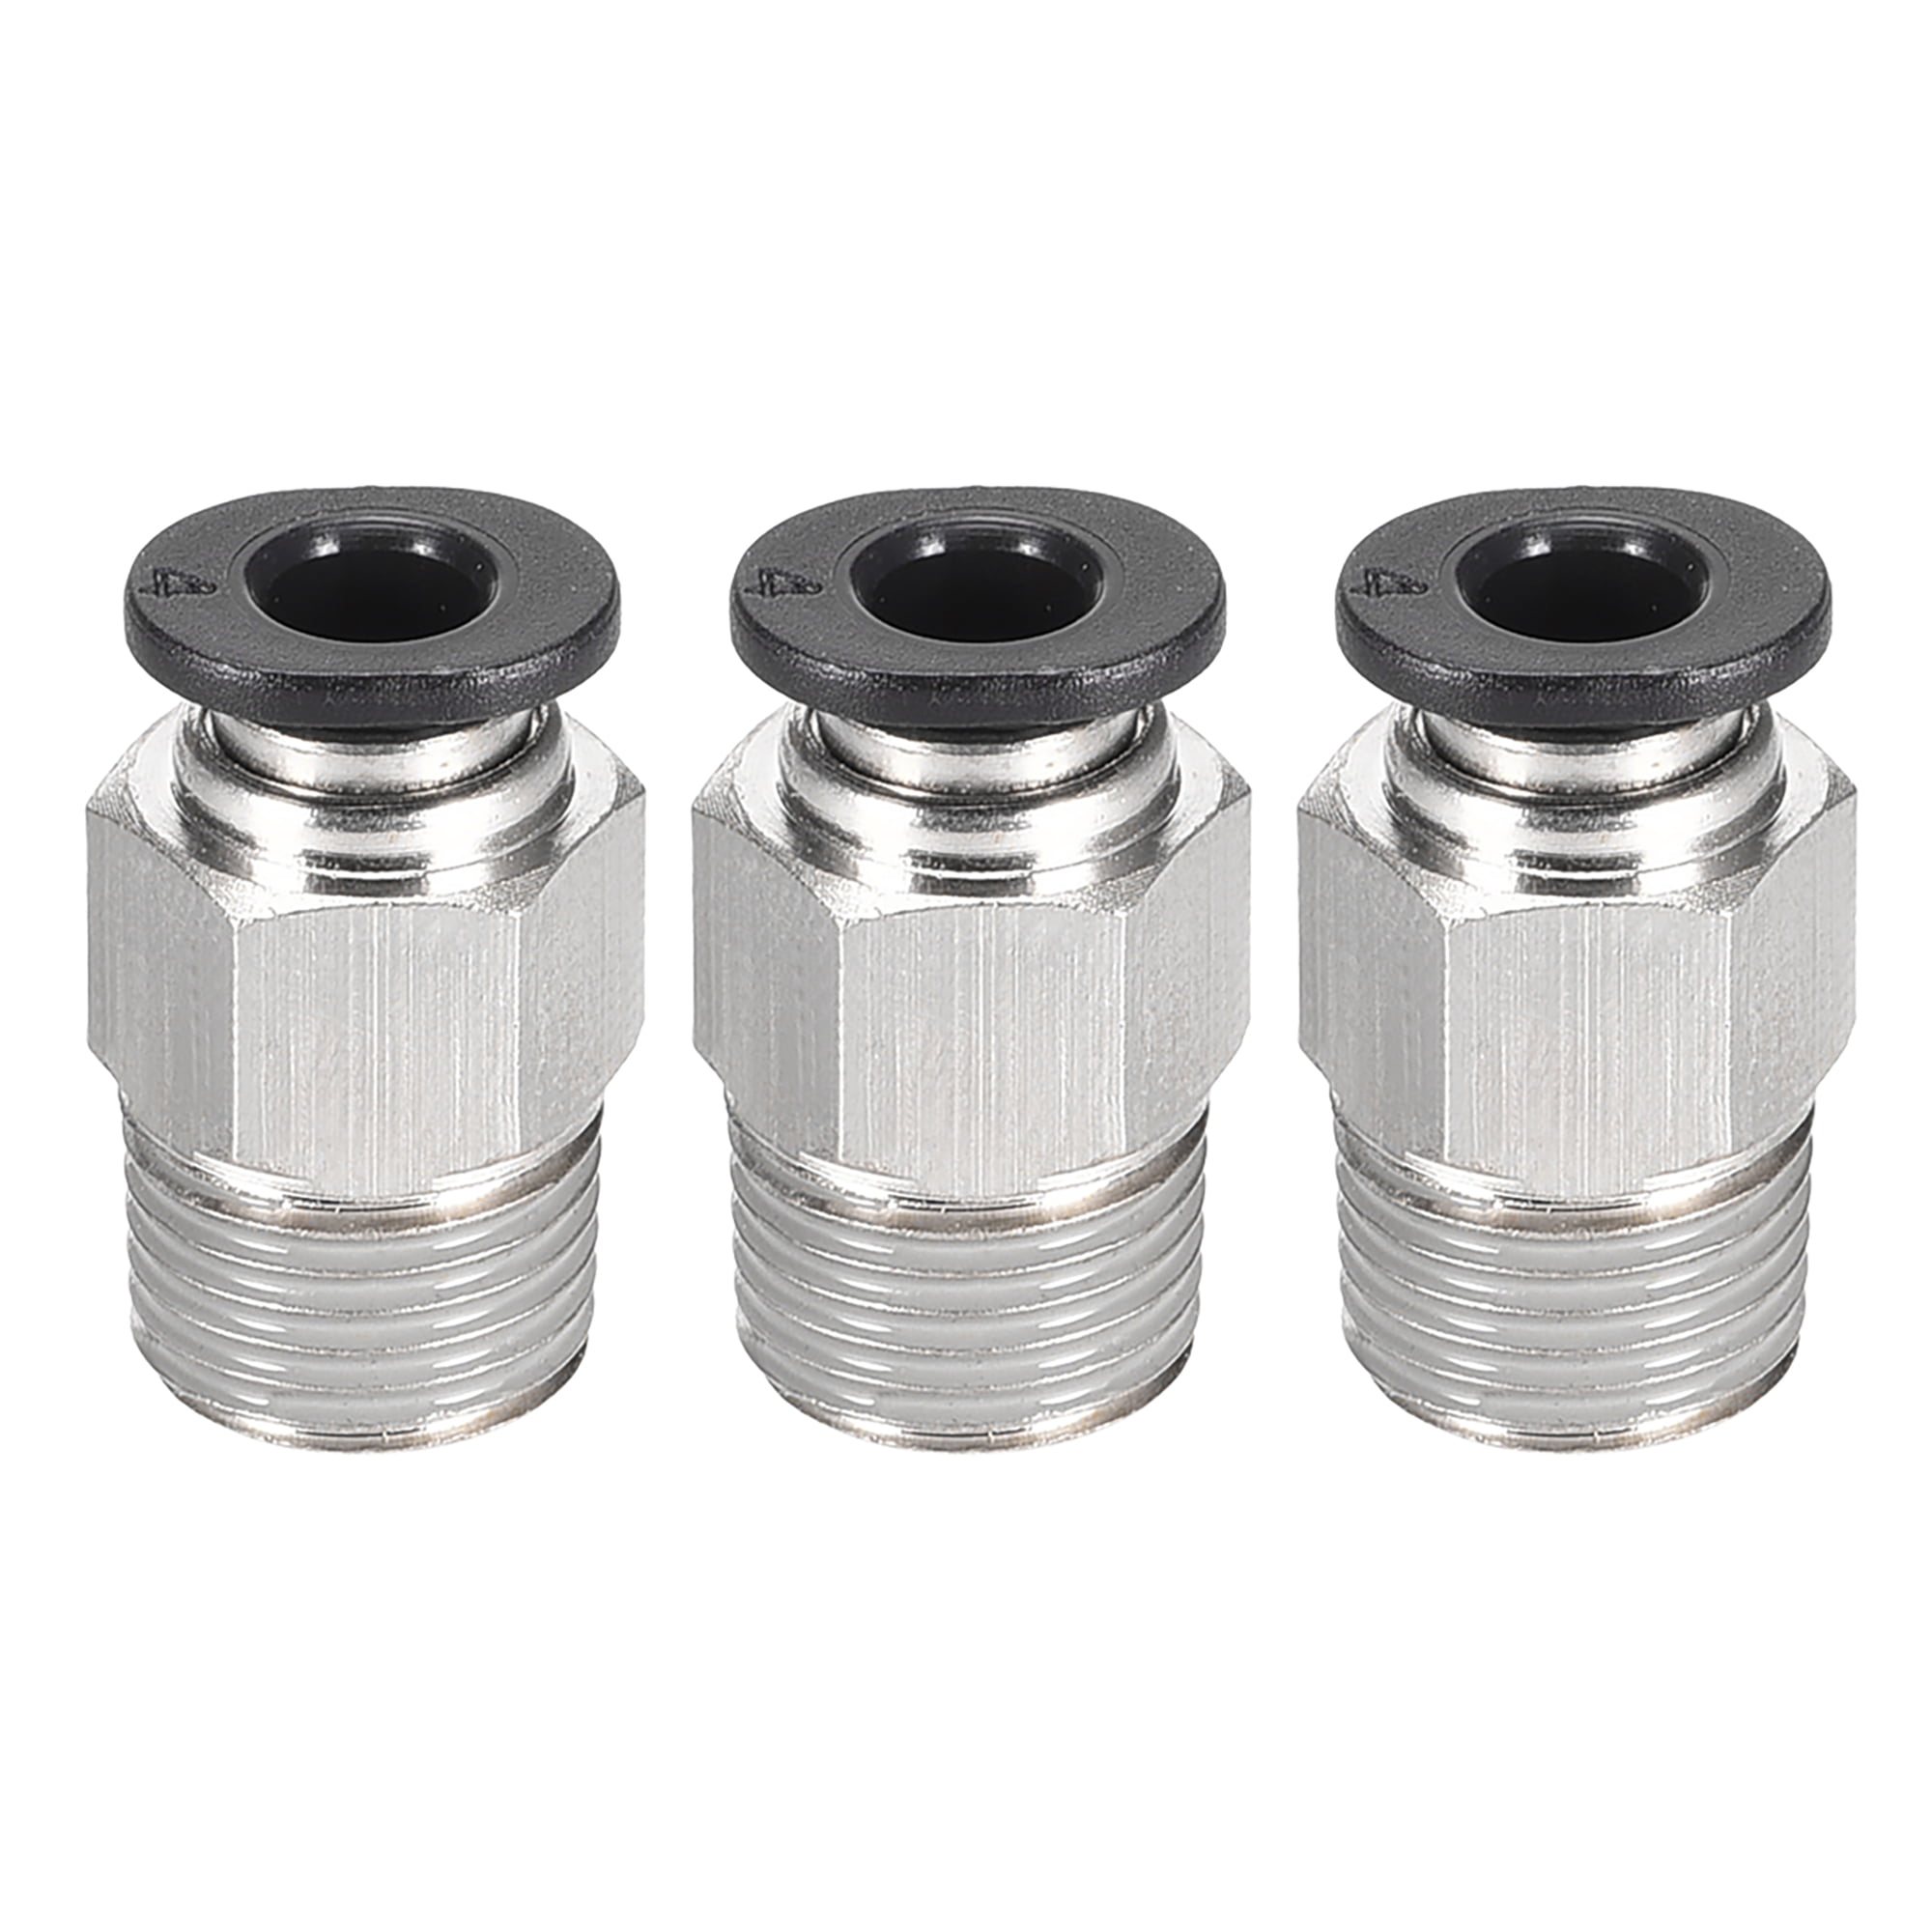 Nylon Pneumatic Push In Fittings Straight Hose Pipe Inline Connectors 4mm 16mm 